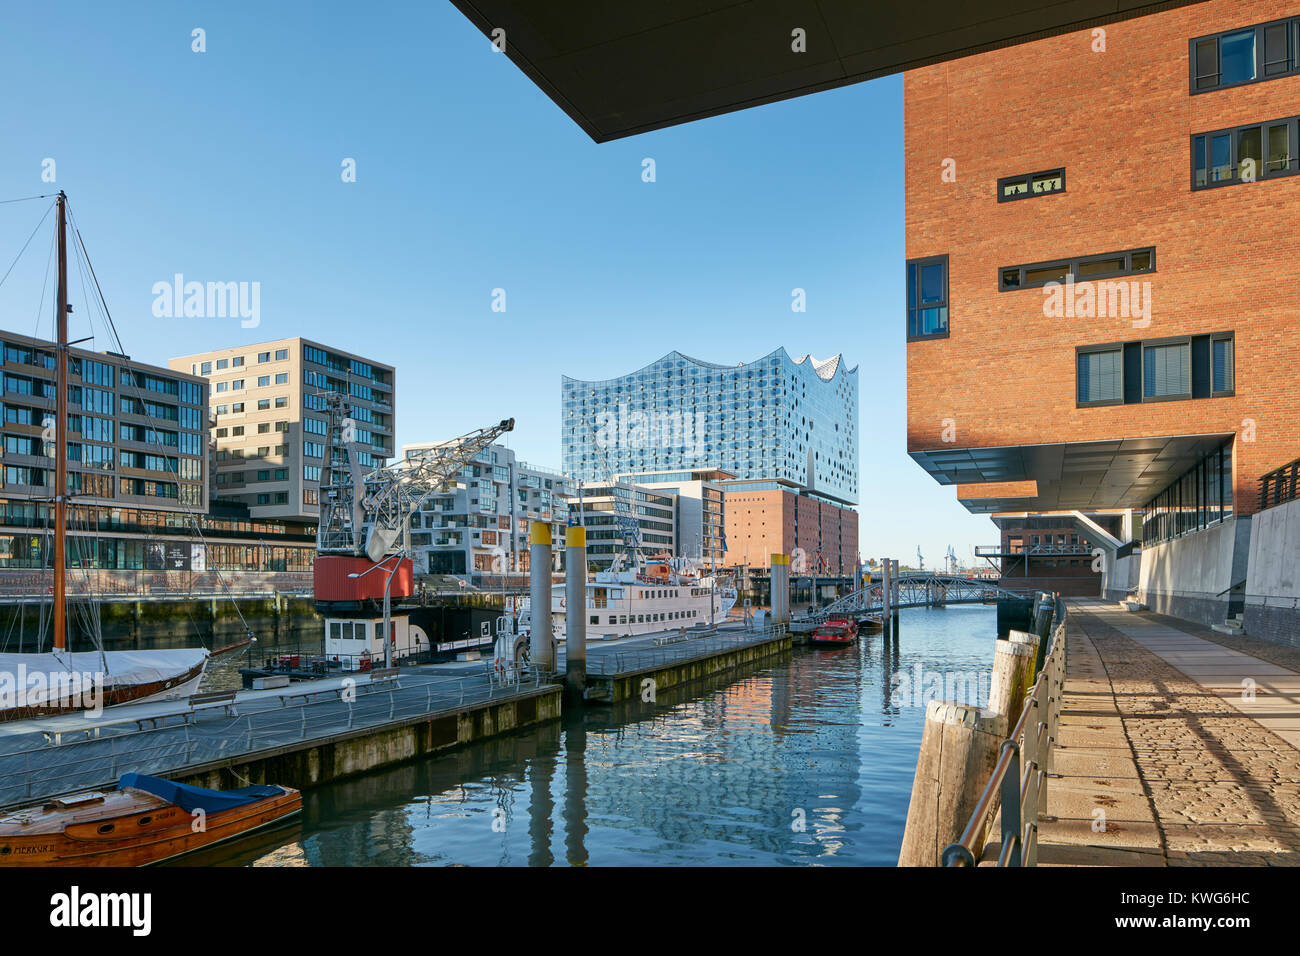 Elbphilharmonie, concert hall by architects Herzog and de Meuron at the River Elbe, HafenCity, Hamburg, Germany. Stock Photo